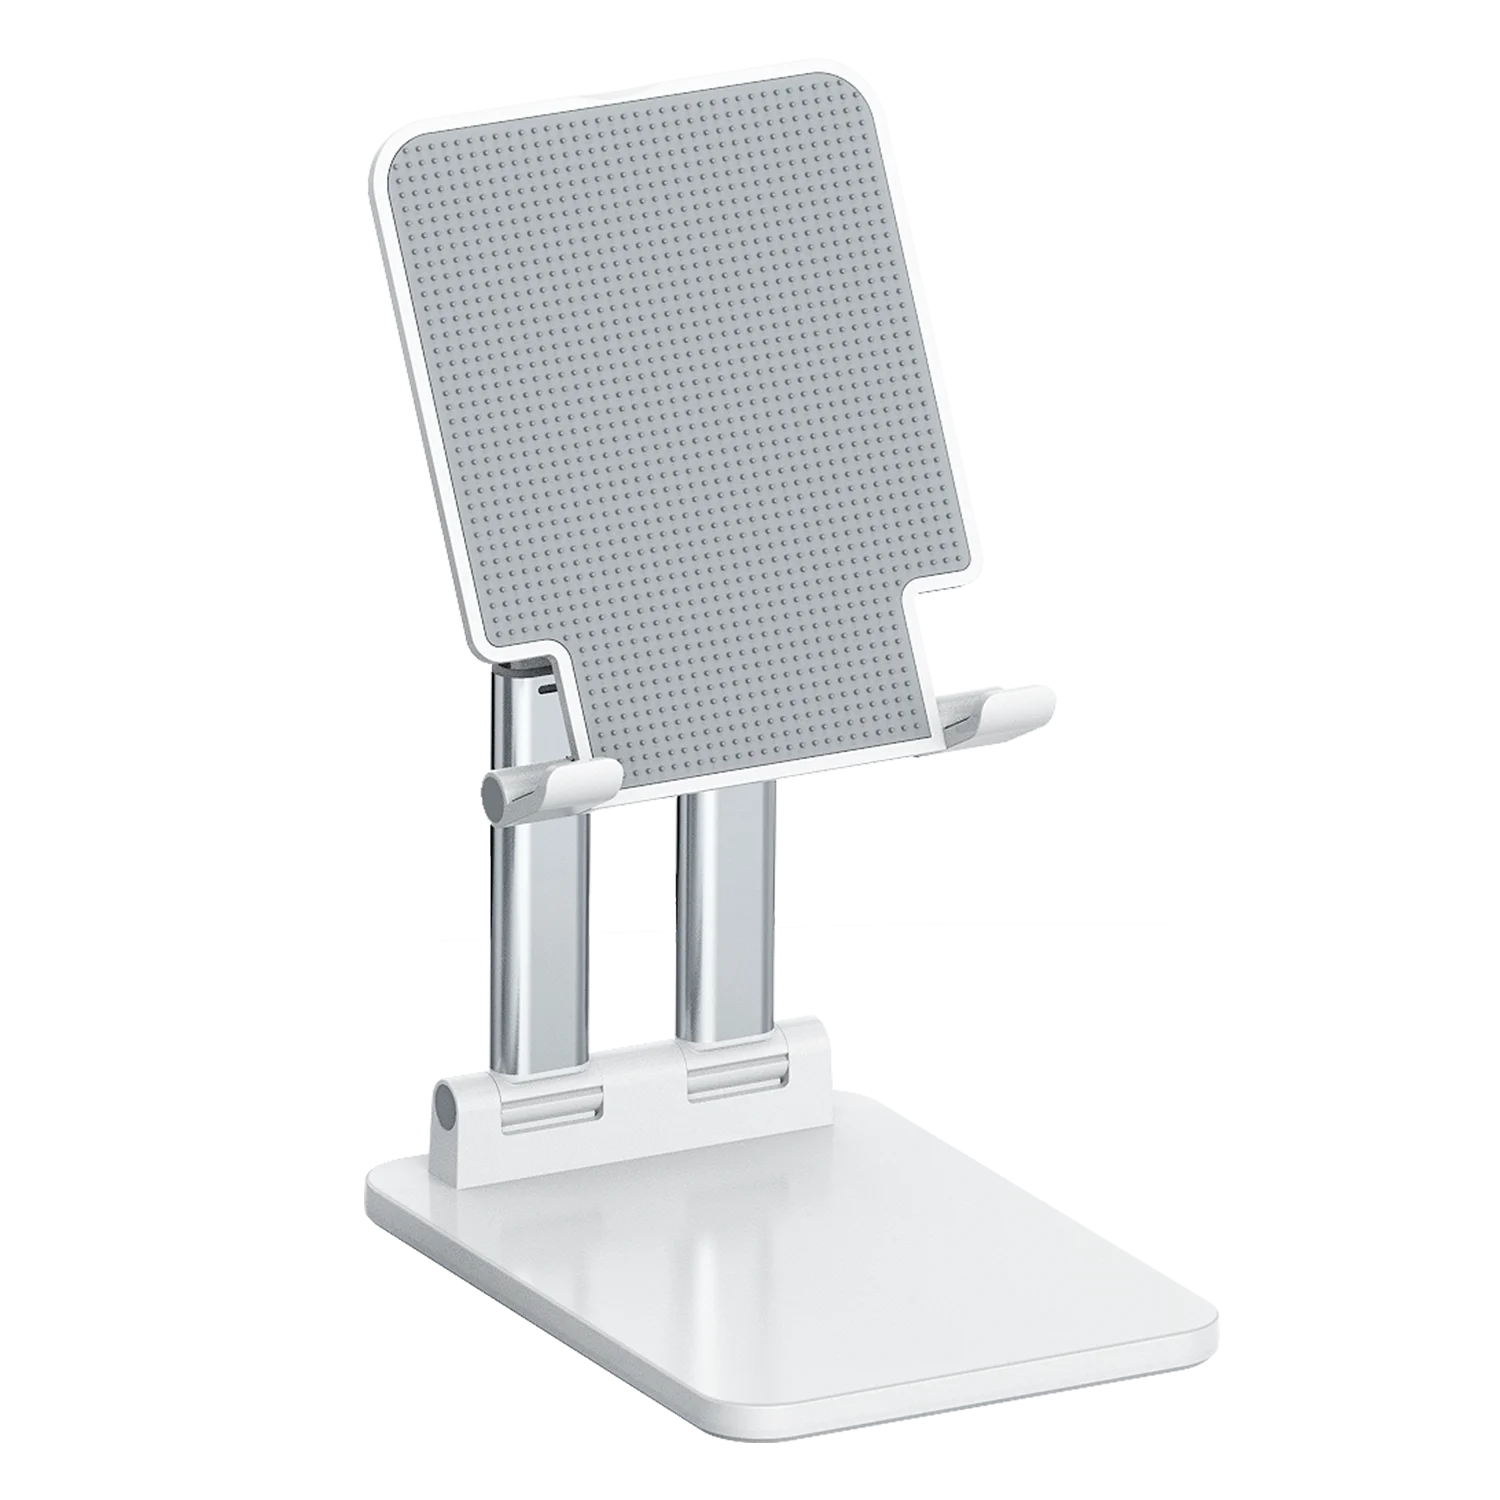 

Folding Telescopic Metal Desktop Tablet Support Stand Bracket for Universal Ipad Stand, Three kinds